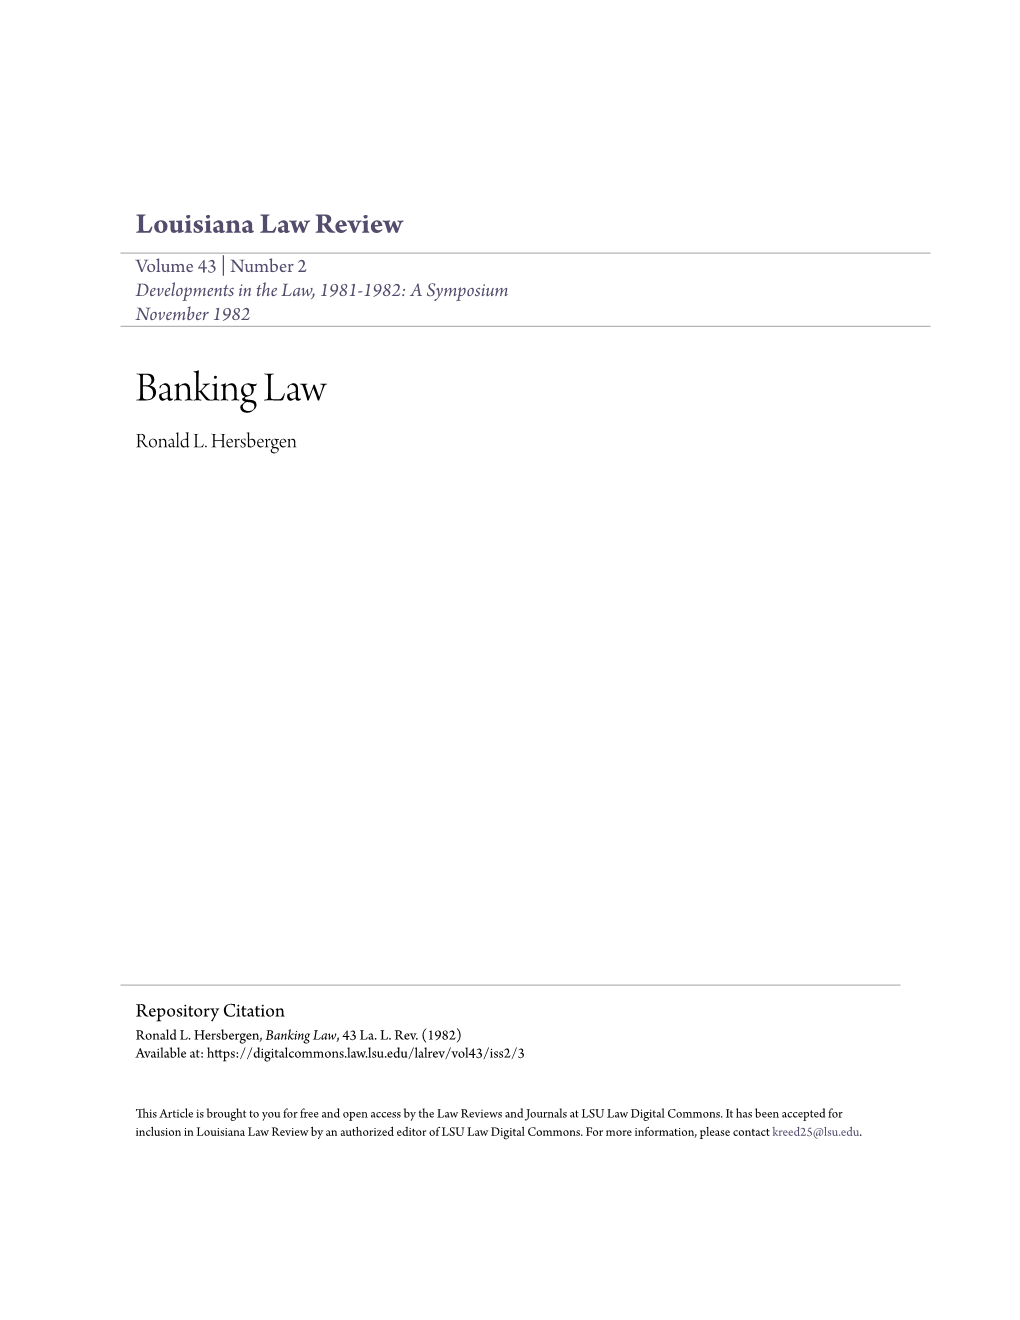 Banking Law Ronald L